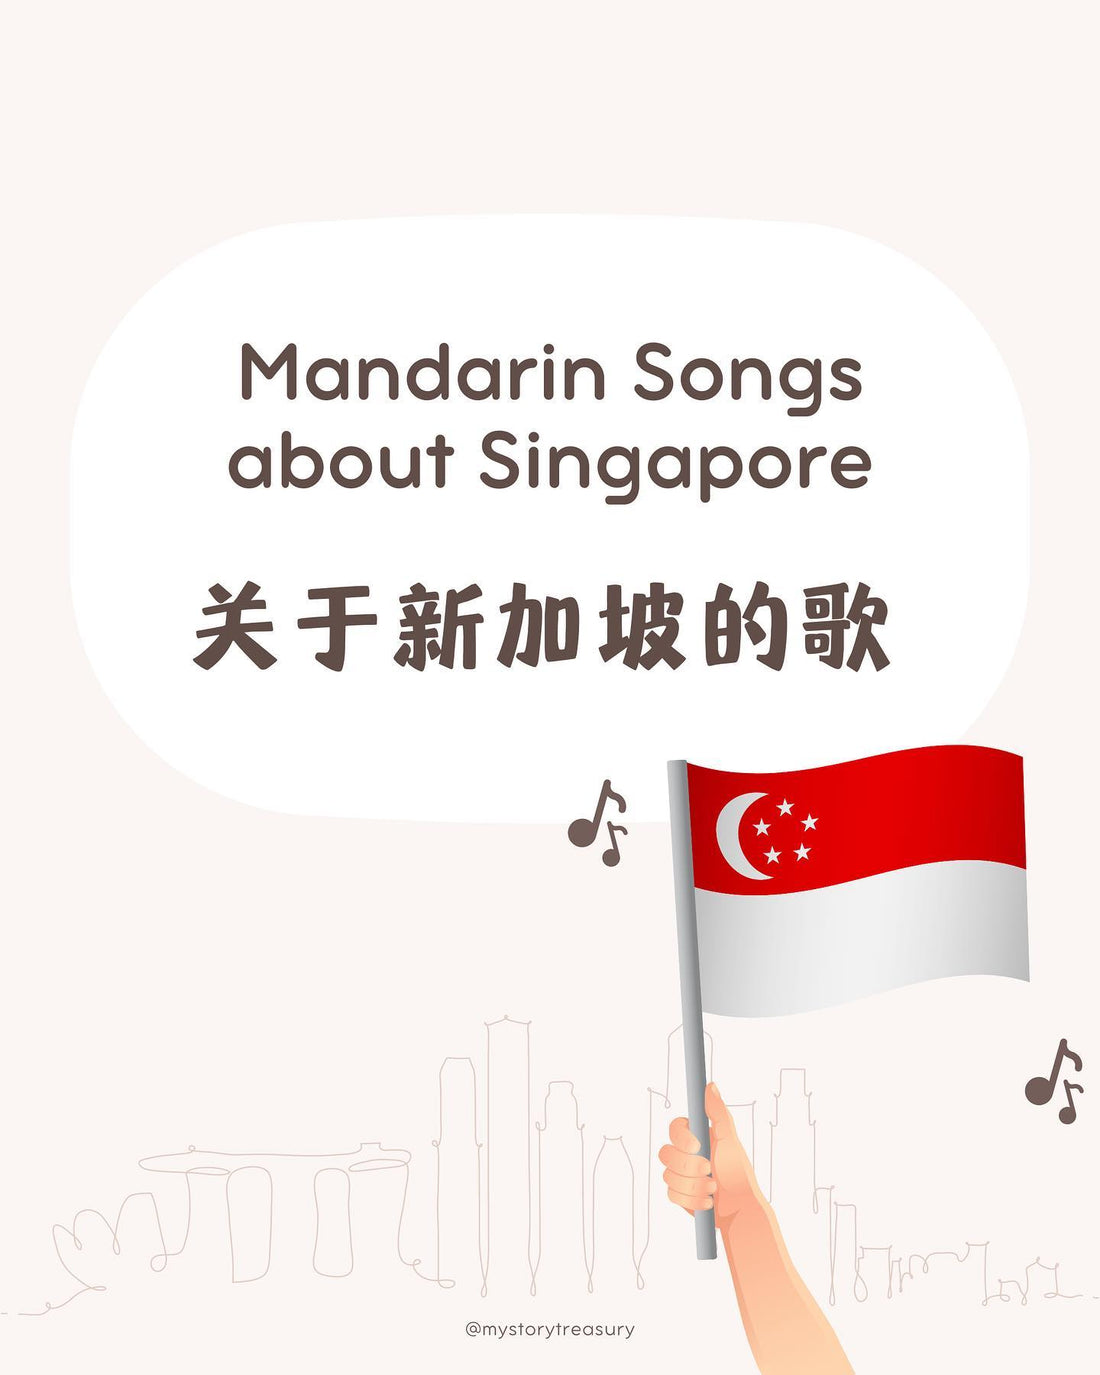 Do you remember singing along to NDP songs while growing up?